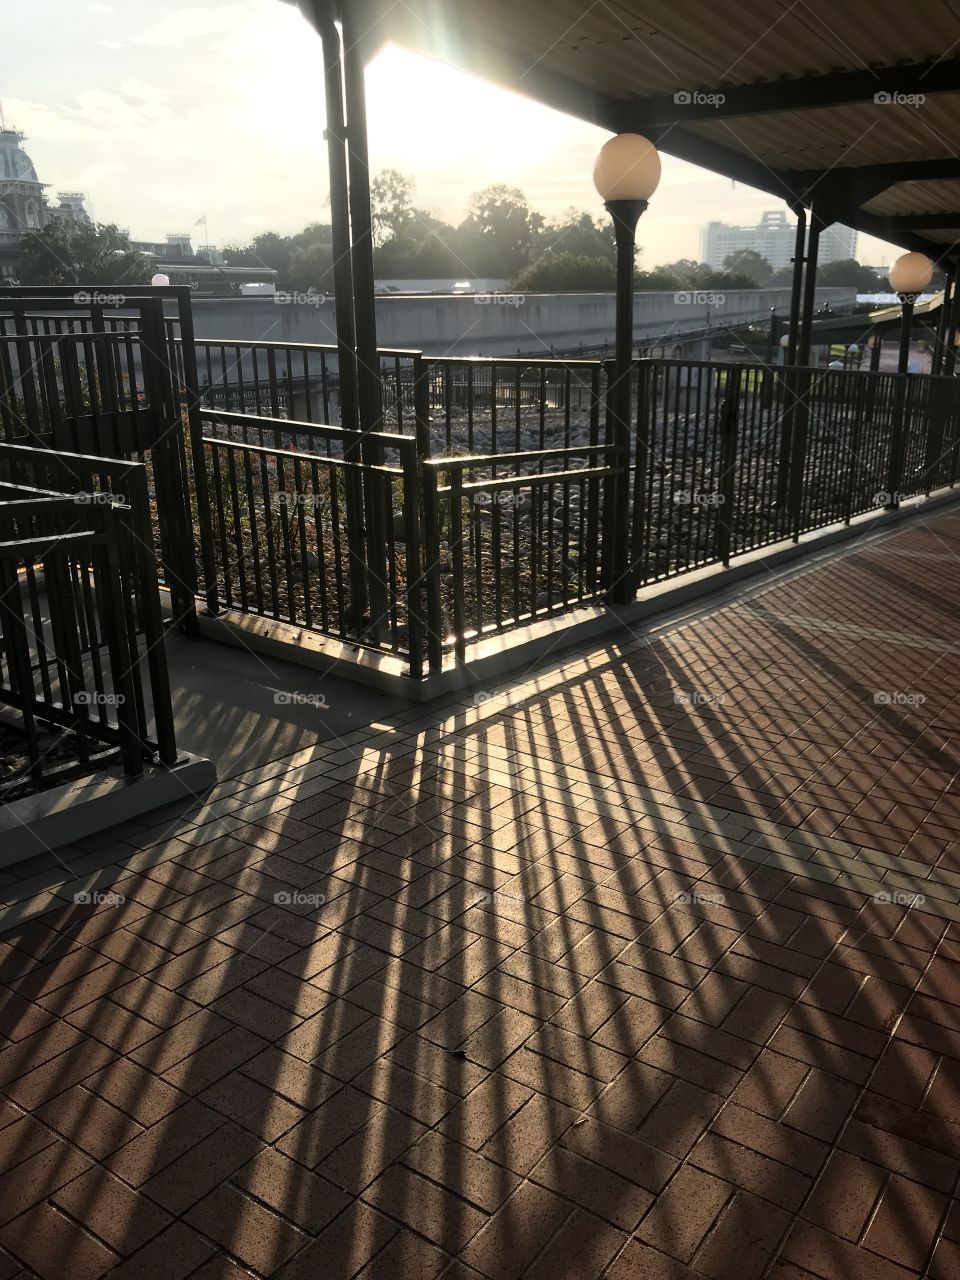 #day72 Everyday Disney World in Orlando Florida.  I have been lost on Disney Properties consecutively since 4/3/19!  You can find it on https://www.facebook.com/selsa.susanna or on IG SelsaCamacho YT SelsaSusanna • Disney’s Epcot 6/13/19 Thursday 